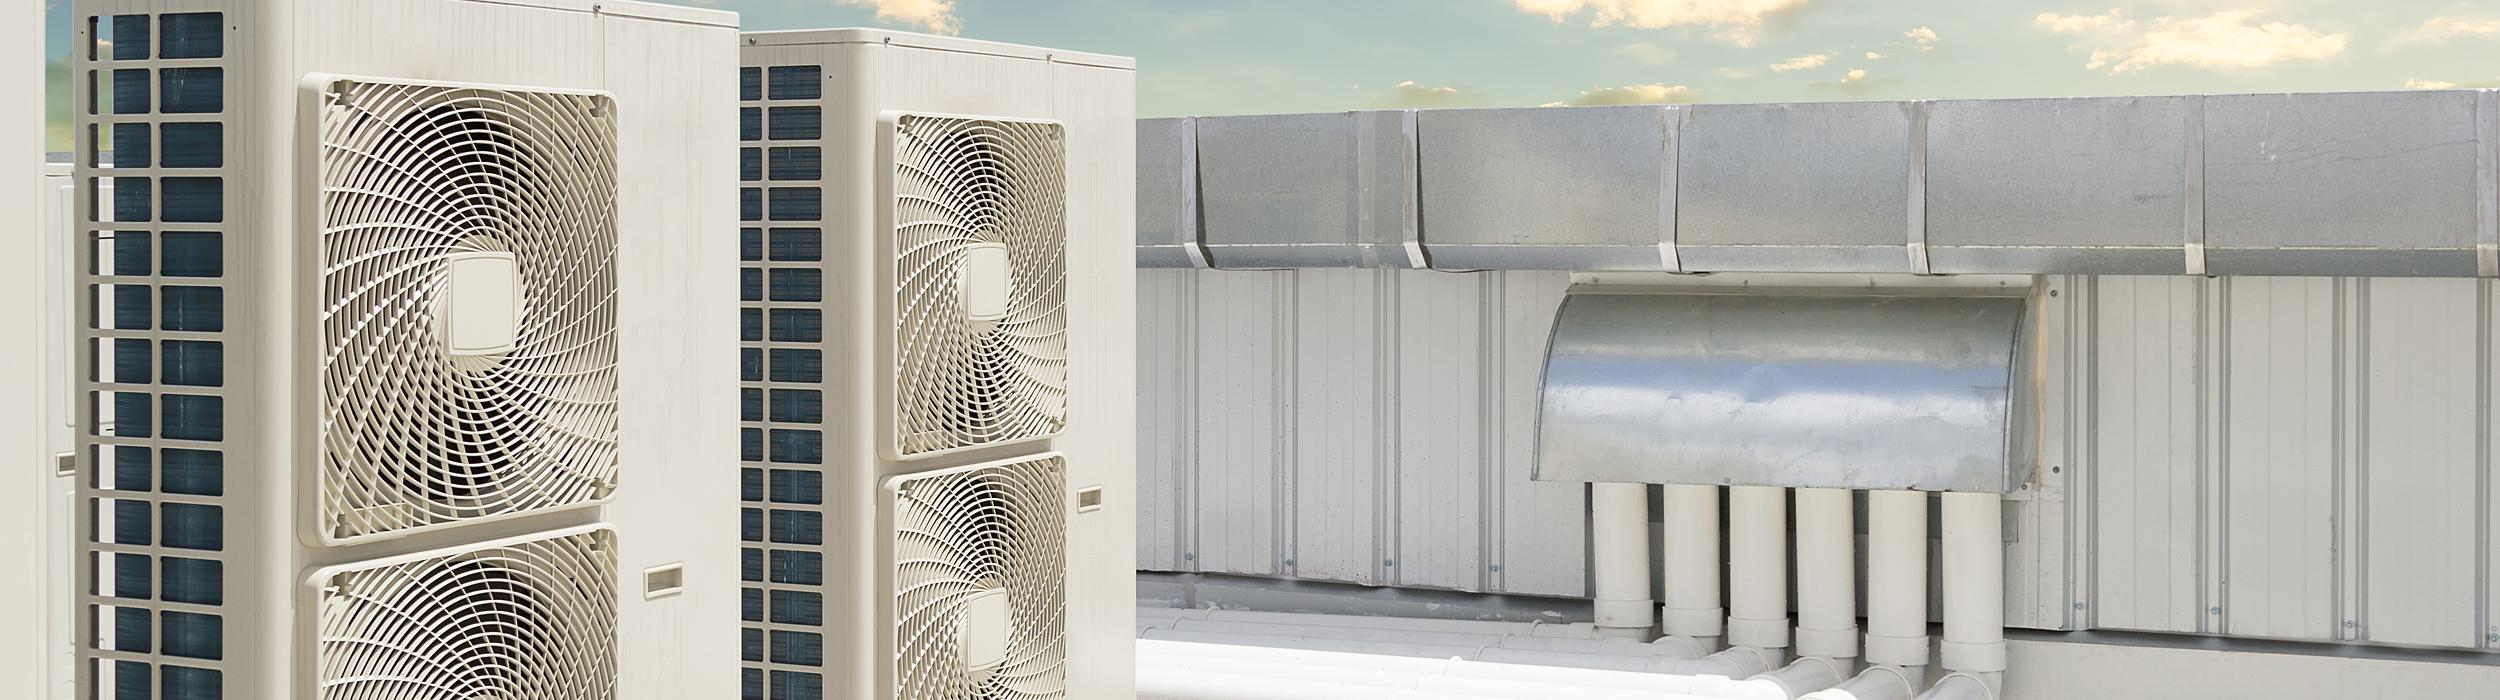 Air conditioning technology for a pleasant indoor climate